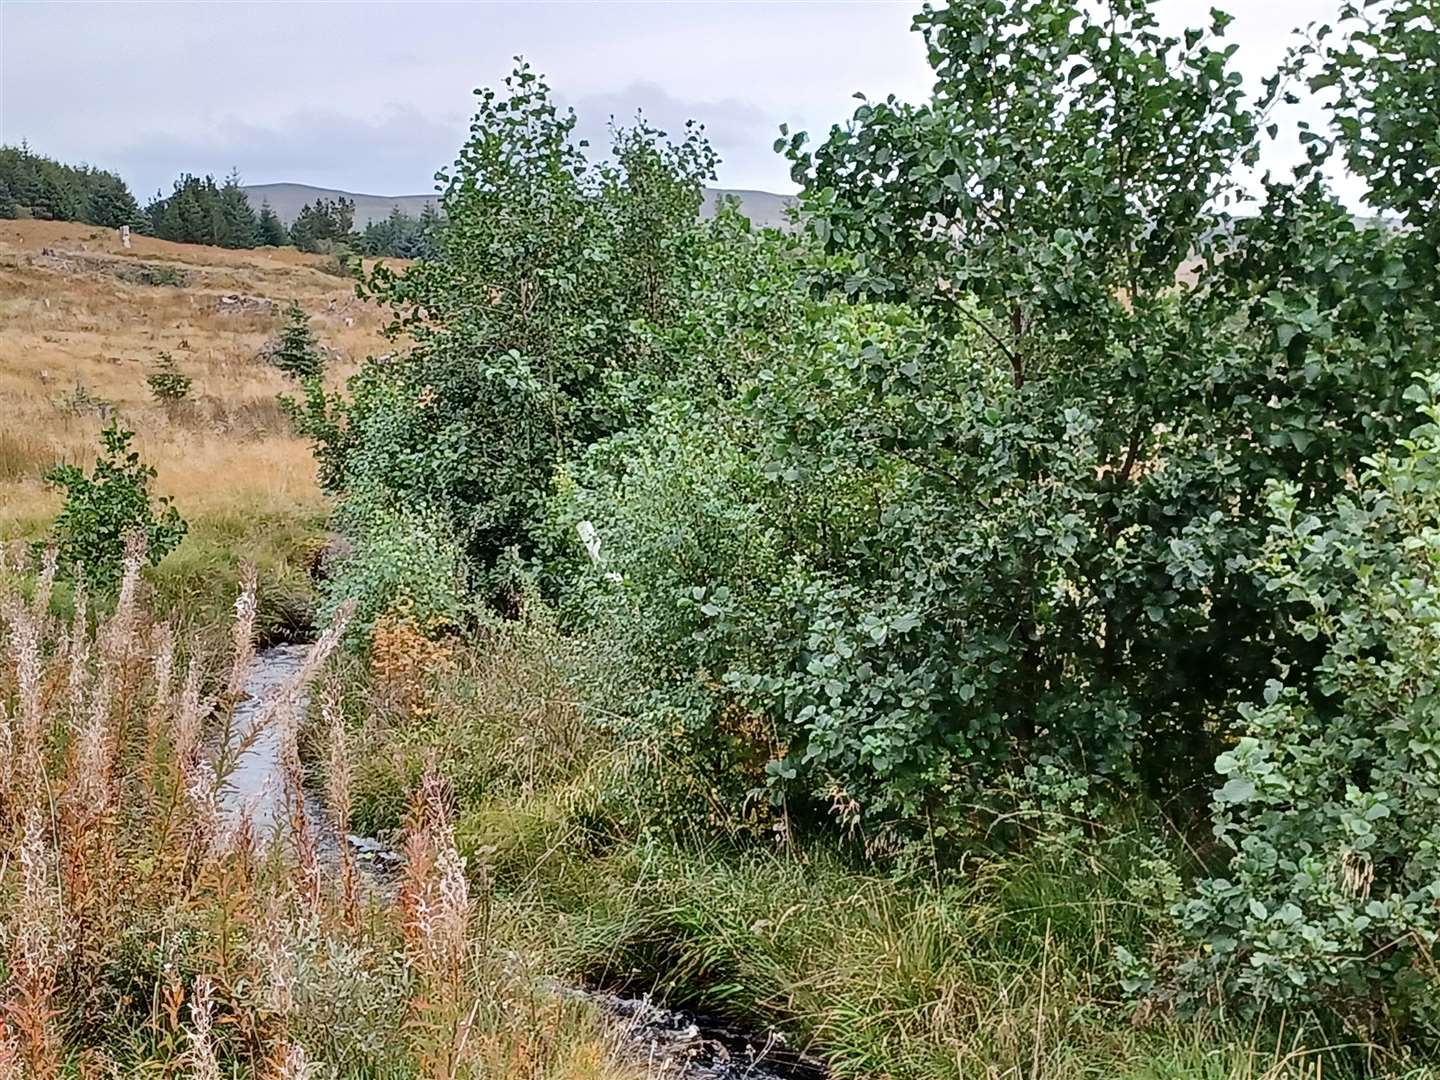 Native species are providing a balance of shade and open areas along watercourses.